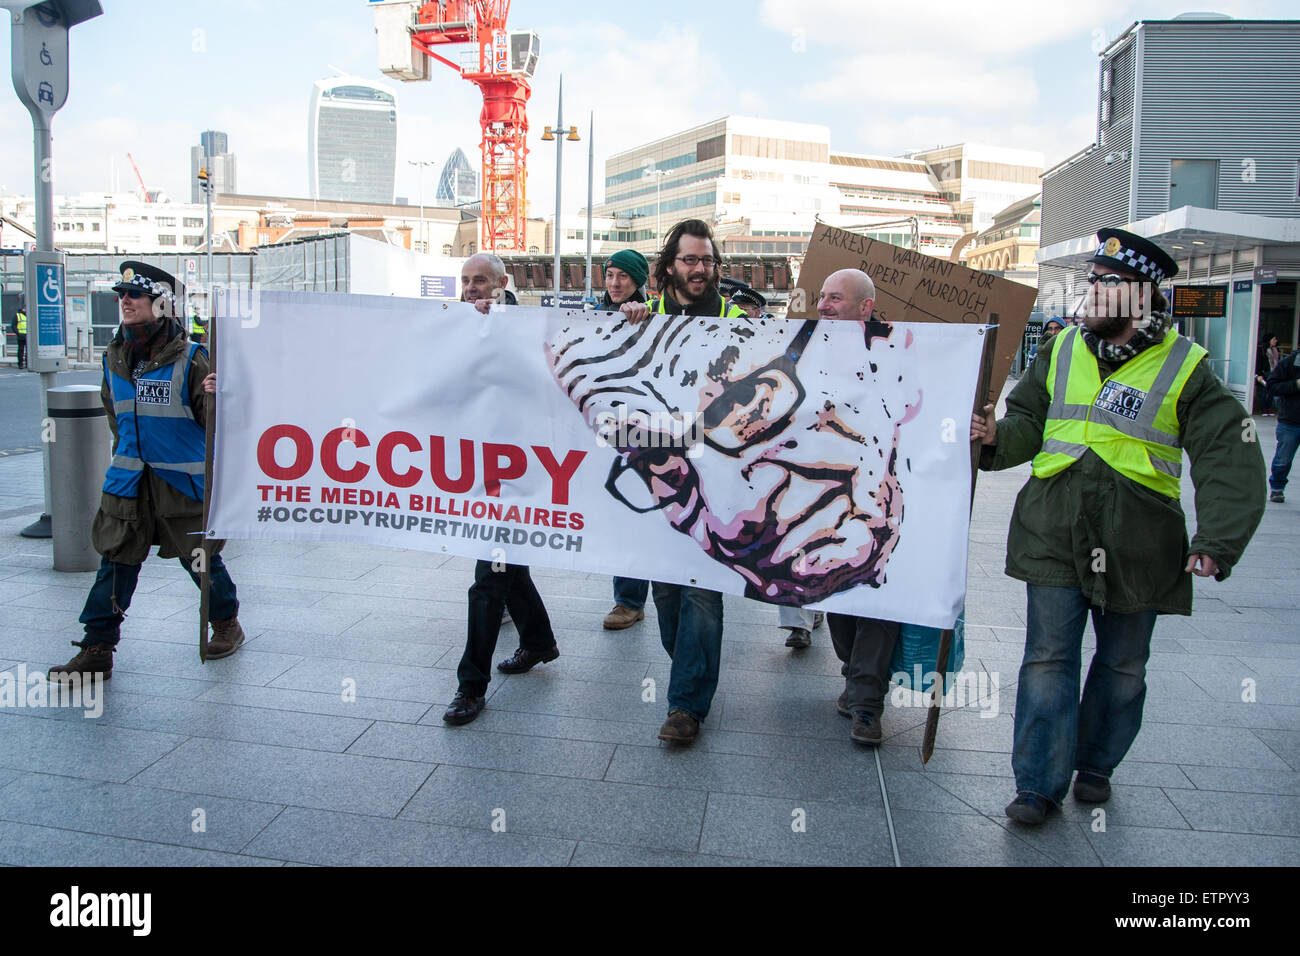 Occupy protesters gather outside the headquarters of News UK, owners of the Sun newspaper to hold an 'Occupy Rupert Murdoch' protest and hand out copies of 'The Occupied Sun.'  Featuring: View Where: London, United Kingdom When: 23 Mar 2015 Credit: Peter Maclaine/WENN.com Stock Photo